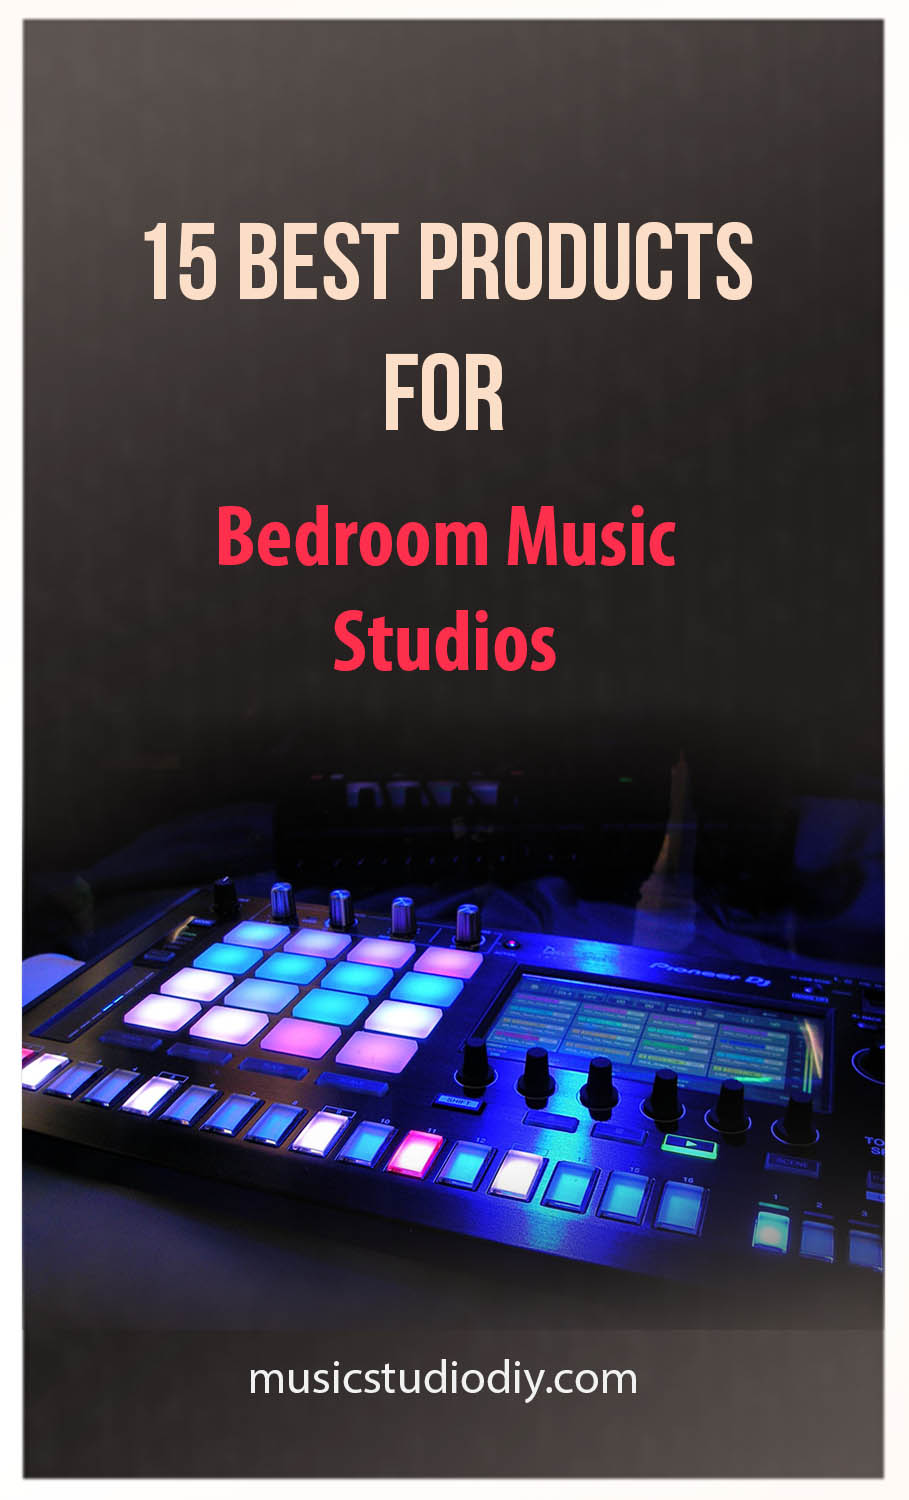 Best Products for Bedroom Music Studios